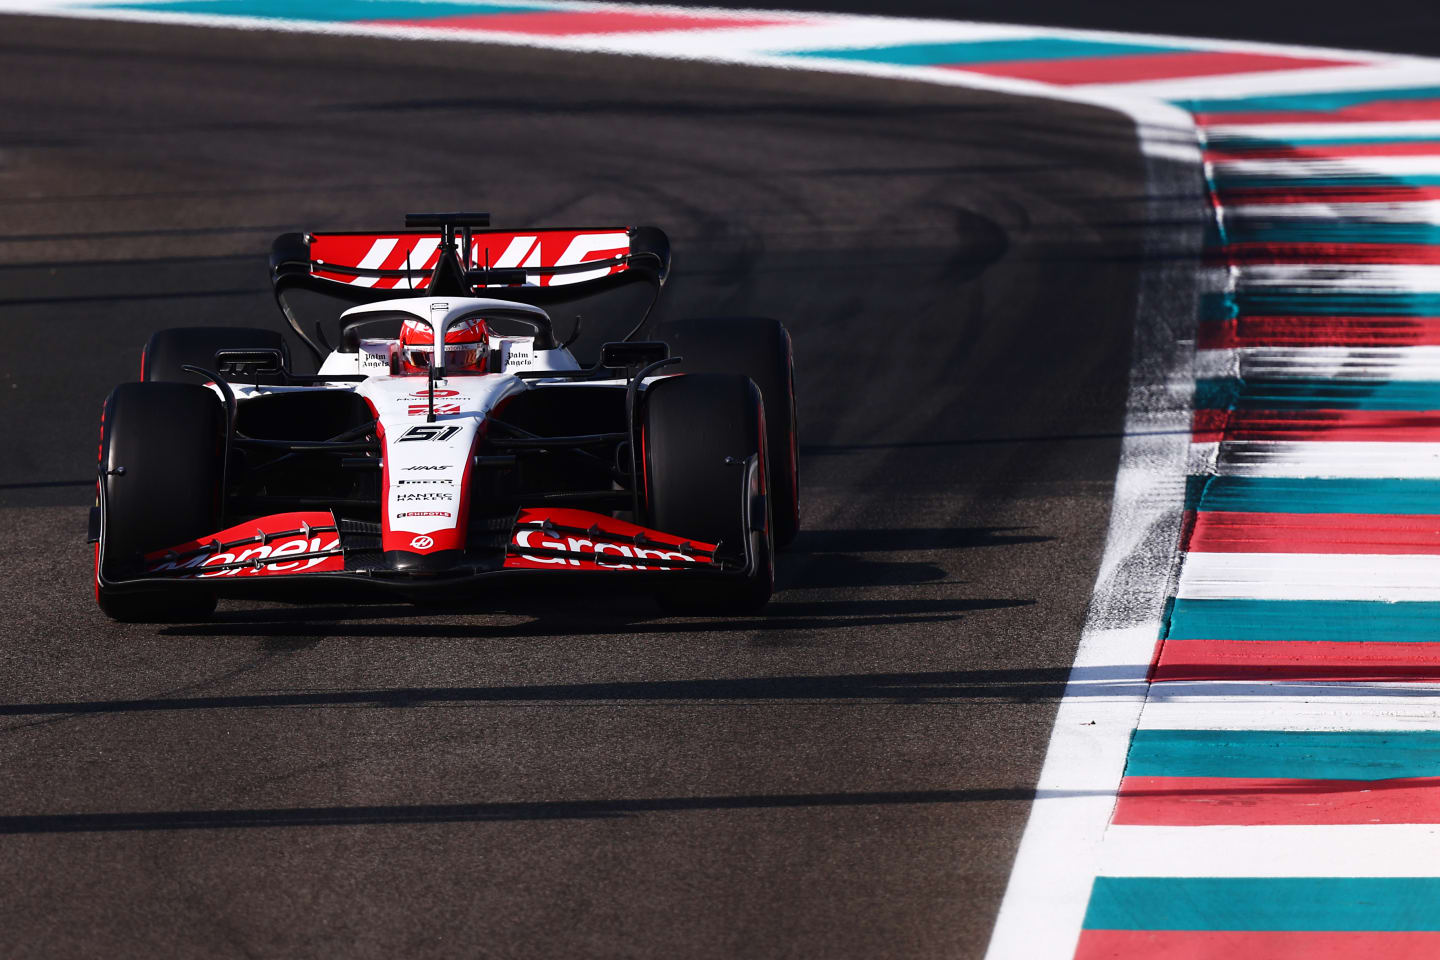 Pietro Fittipaldi out on track at the Yas Marina Circuit